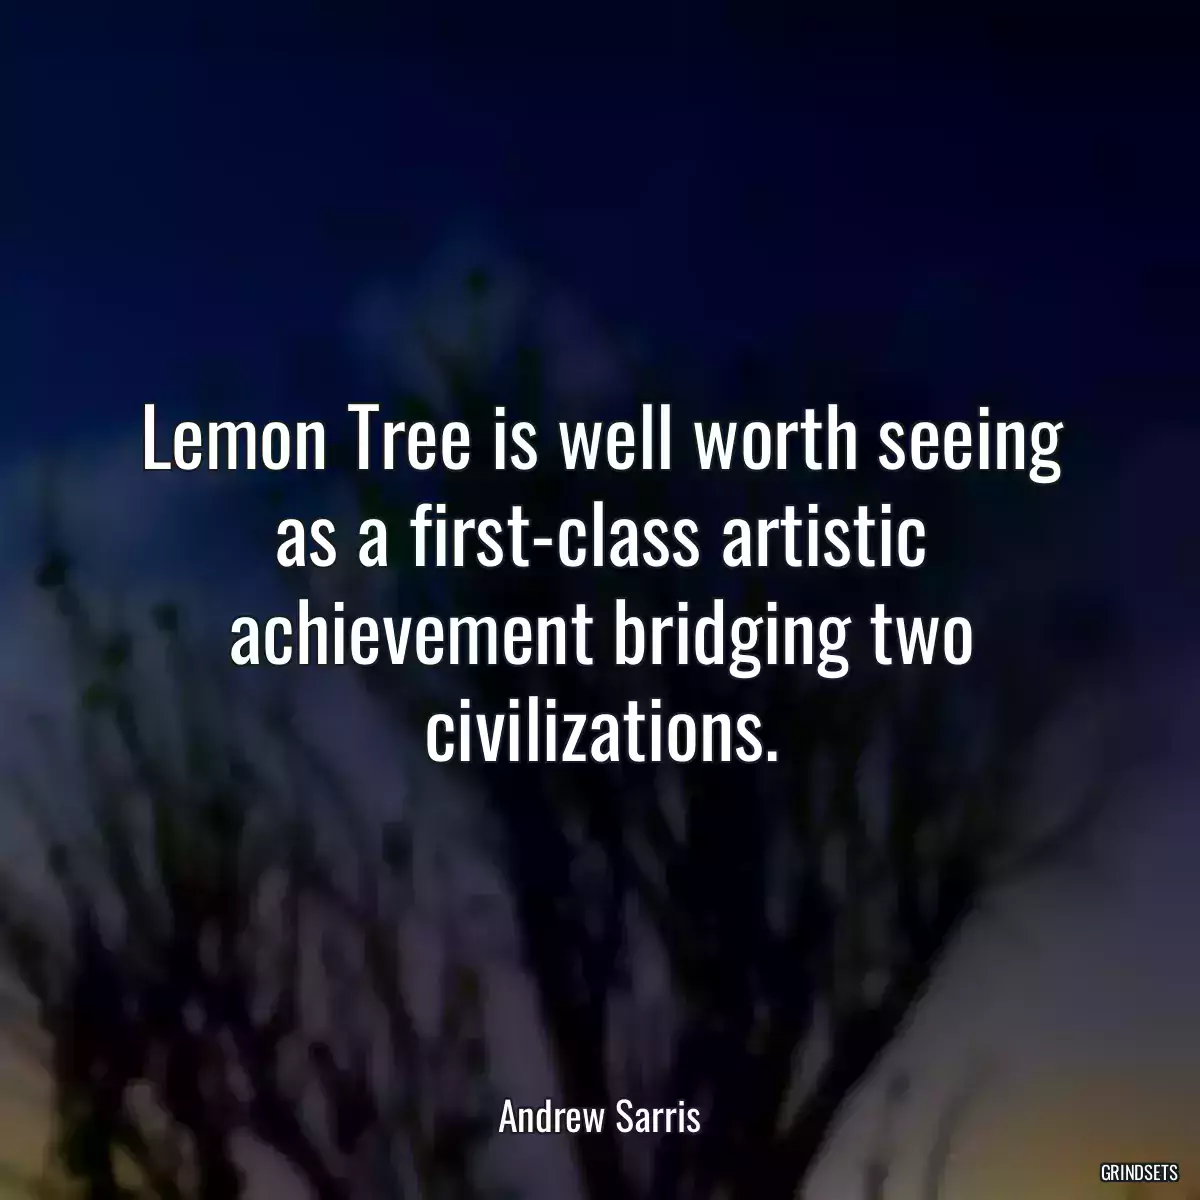 Lemon Tree is well worth seeing as a first-class artistic achievement bridging two civilizations.